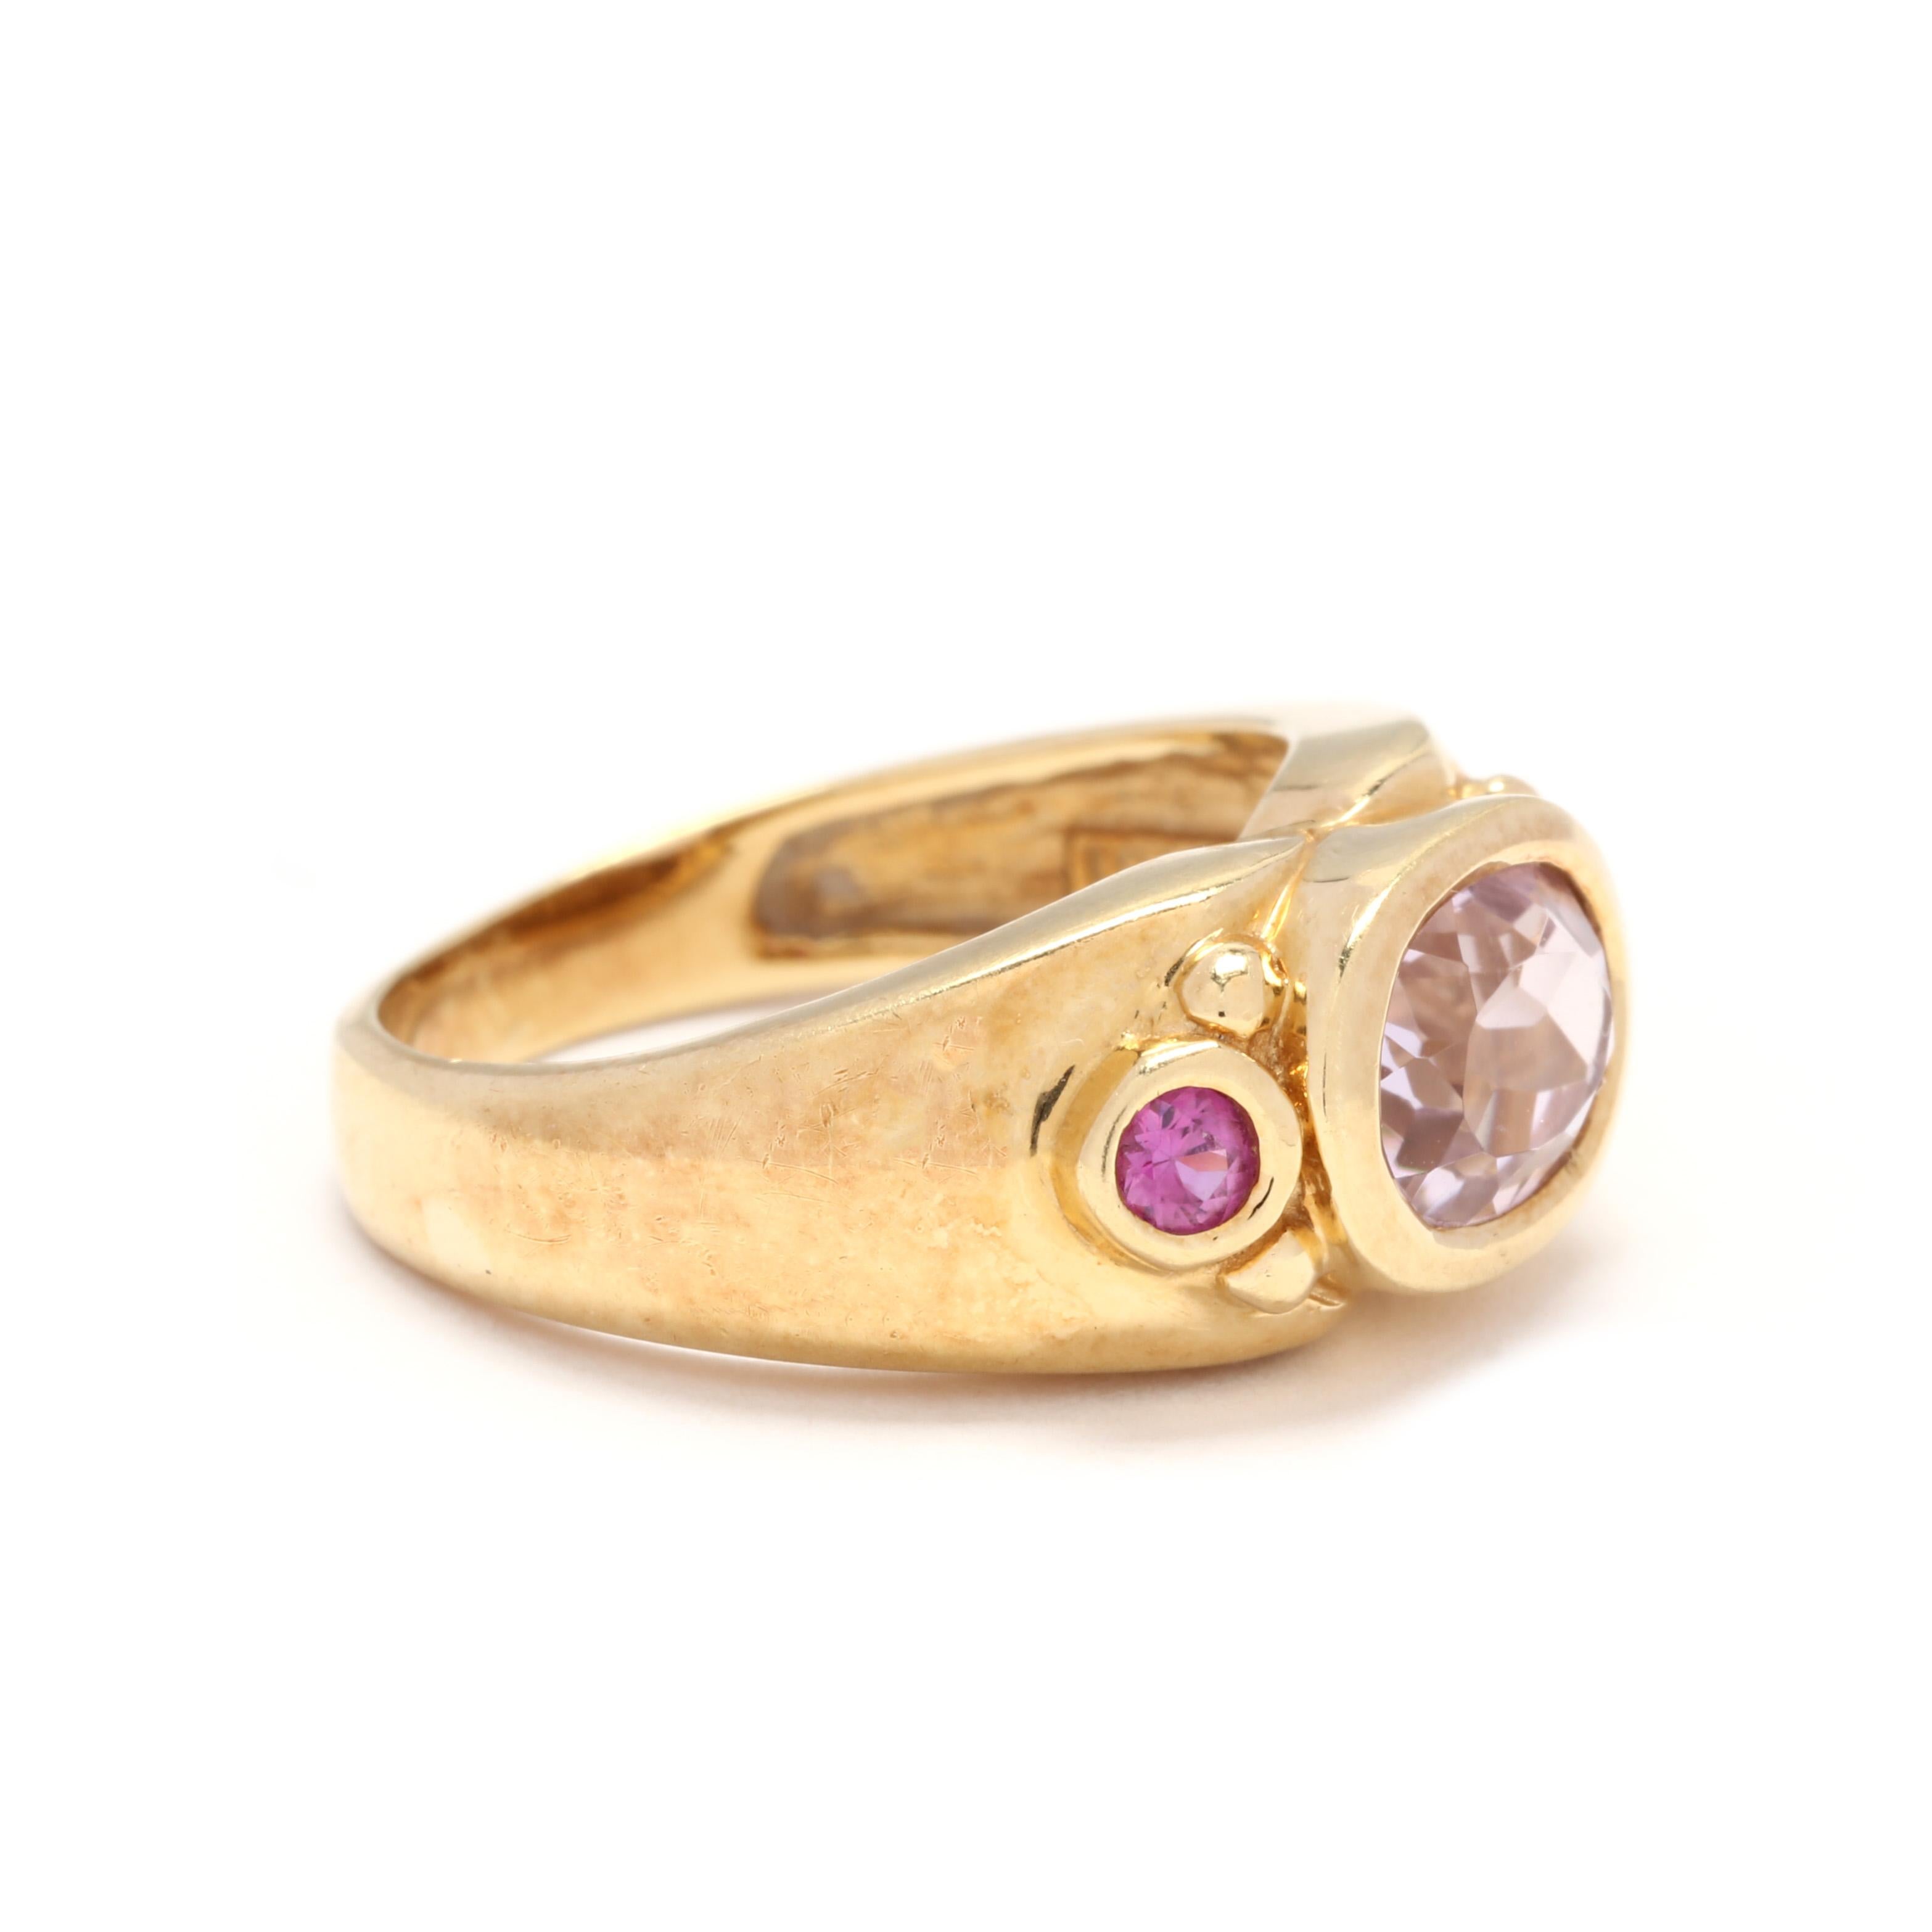 A vintage 18 karat yellow gold, pink topaz and pink sapphire ring. A wide tapered band centered on a horizontal, bezel set oval cut pink topaz weighing approximately 2.40 carats with a bezel set, round cut pink sapphire on either side and with